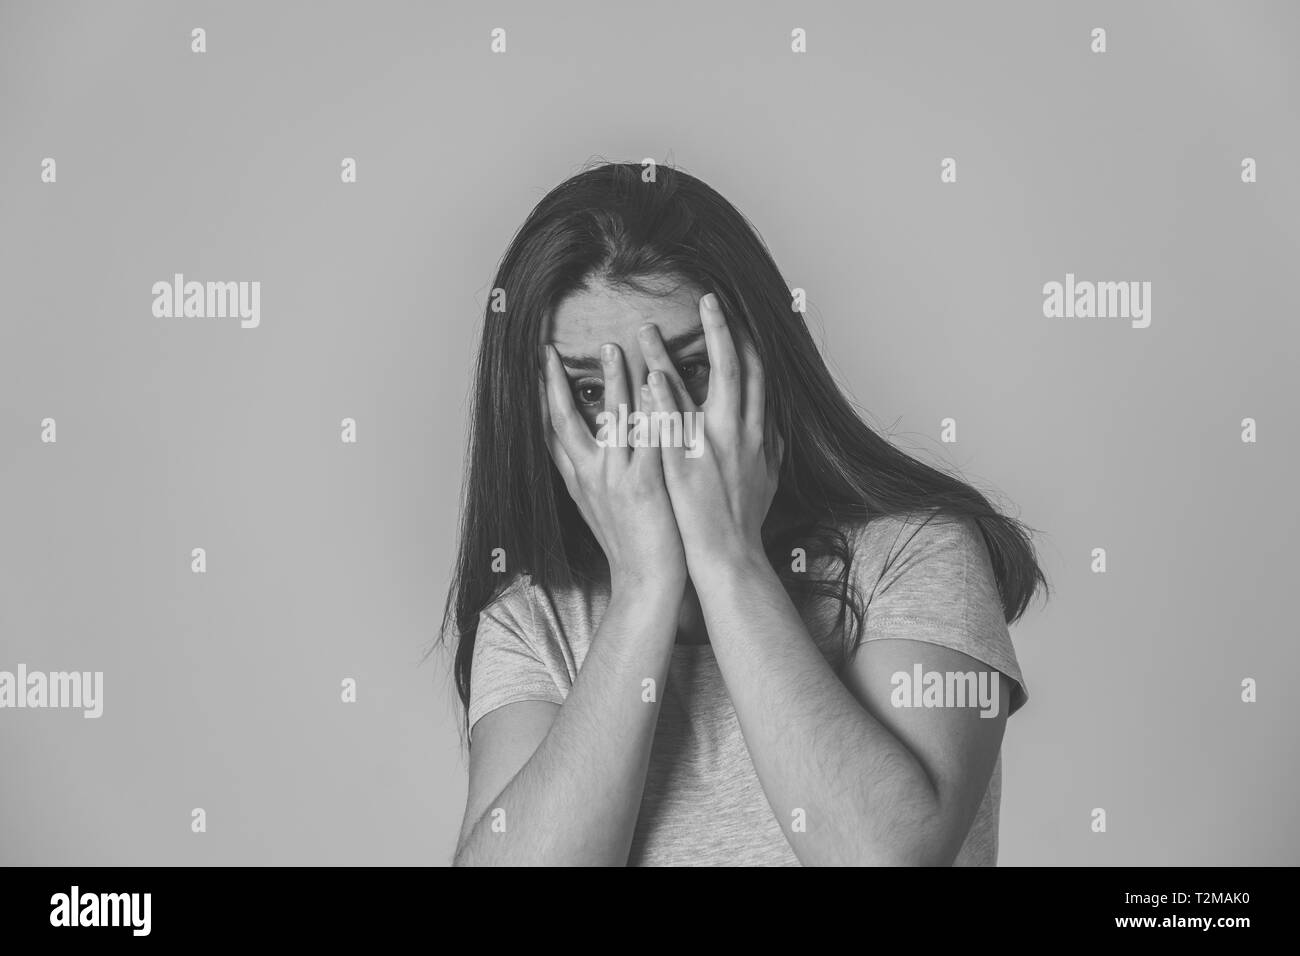 Black and white portrait of young woman feeling scared and shocked making fear, anxiety gestures. Looking terrified and covering herself. Copy space.  Stock Photo